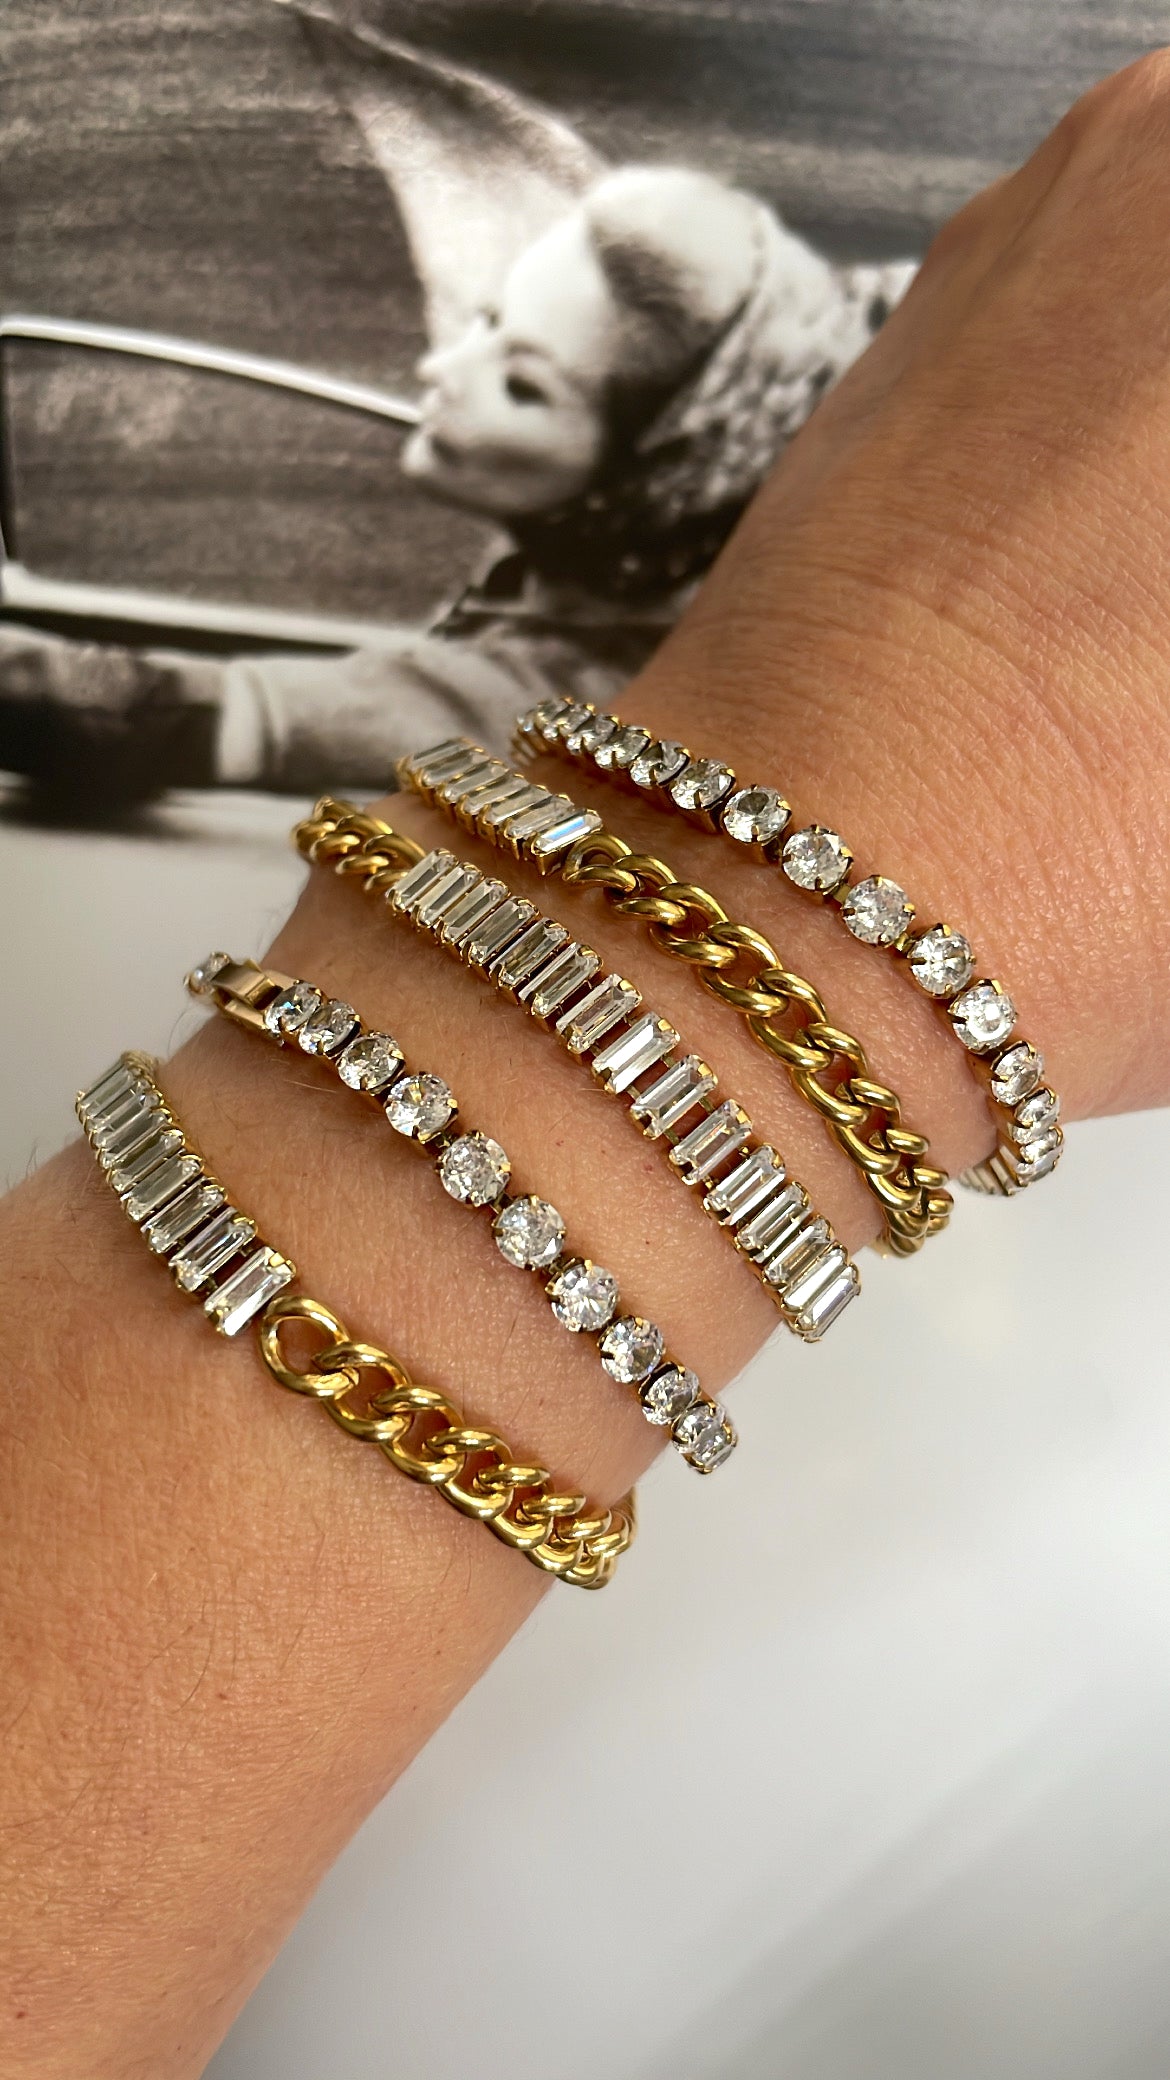 Stainless steel crystals bracelets